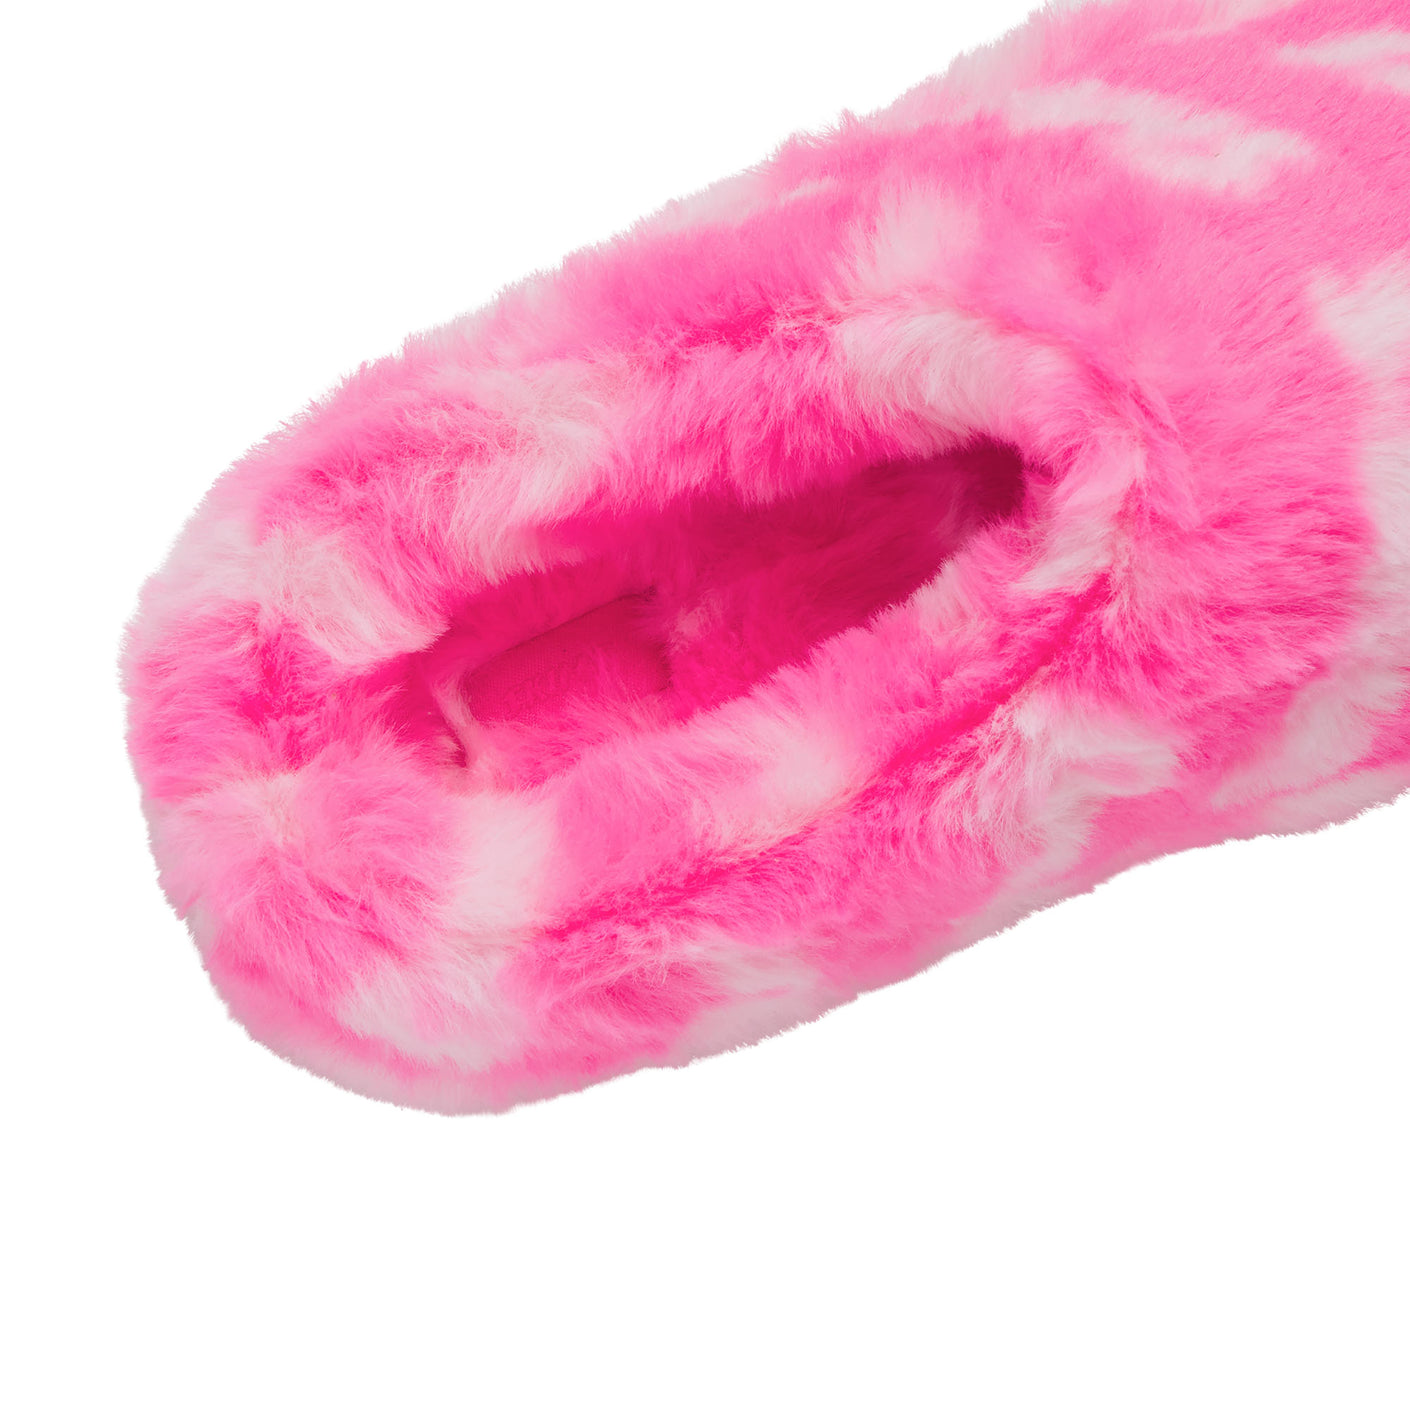 SKIMS The Slide Launches With Five Fluffy Slipper Options